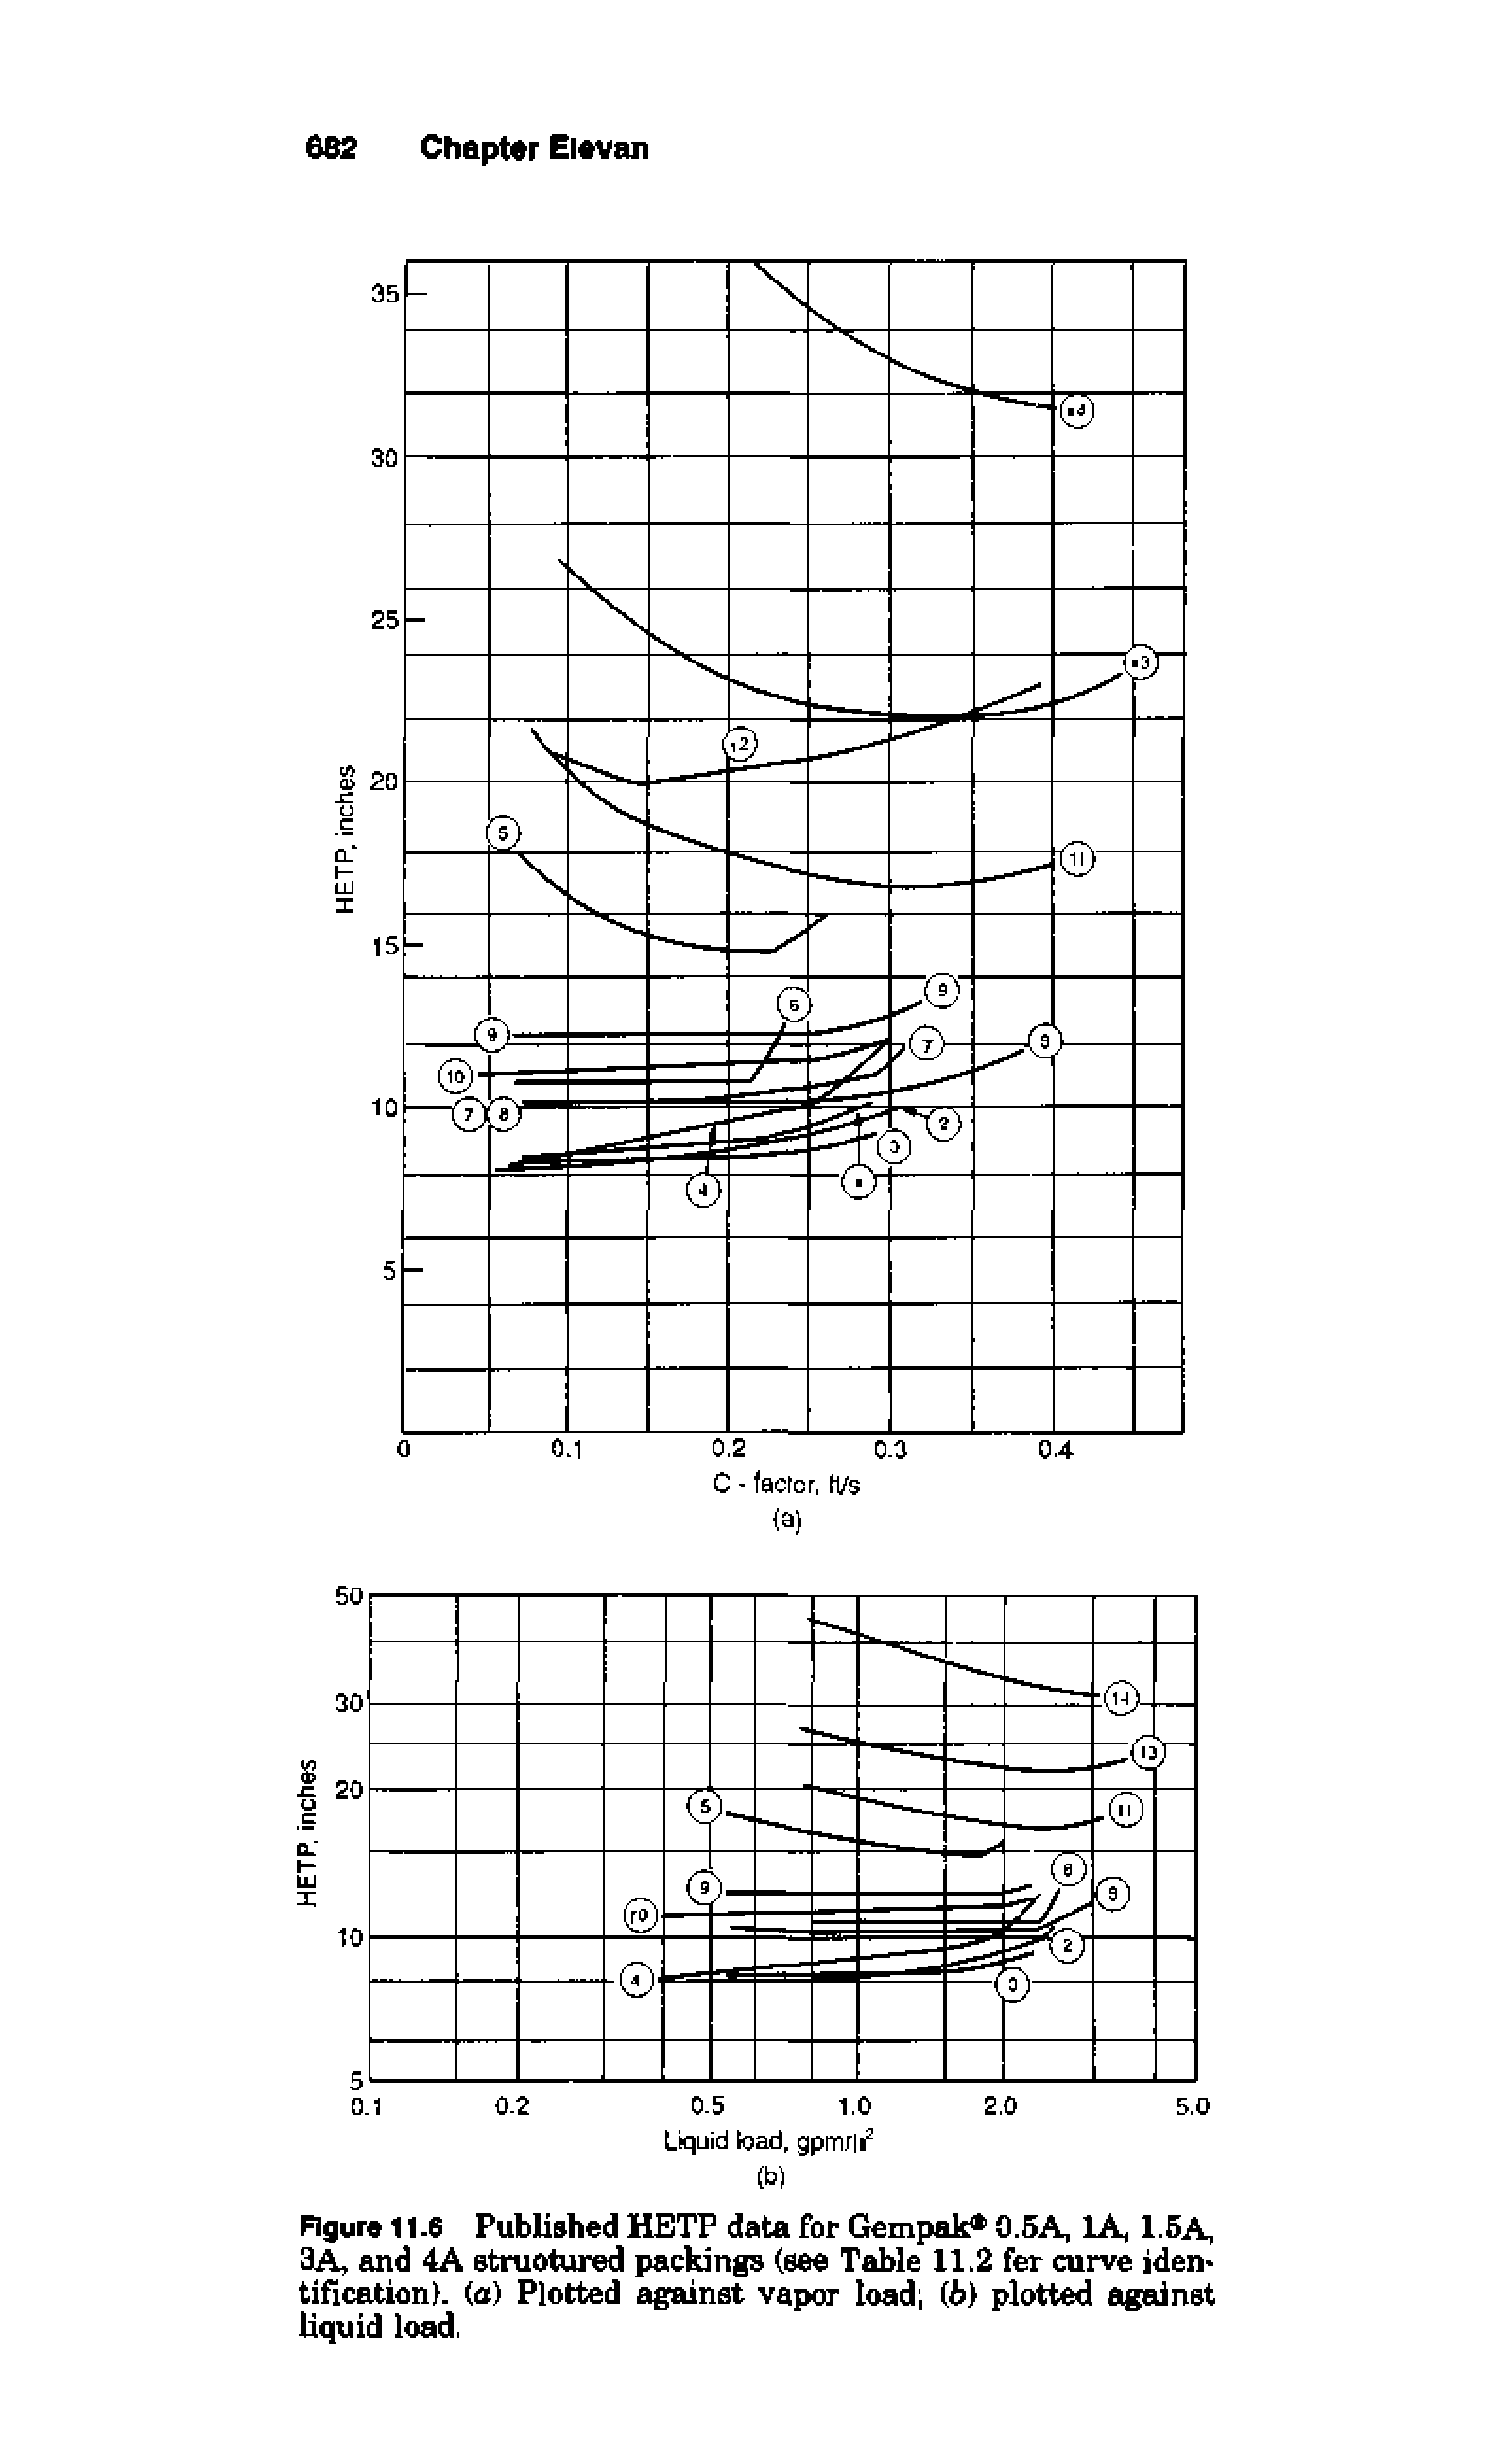 Figure 11.6 Published HETP data for Gempak 0.5A, 1A, 1.5A, 3A, and 4A struotured packings (see Table 11.2 fer curve identification). (a) Plotted against vapor load (6) plotted against liquid load.